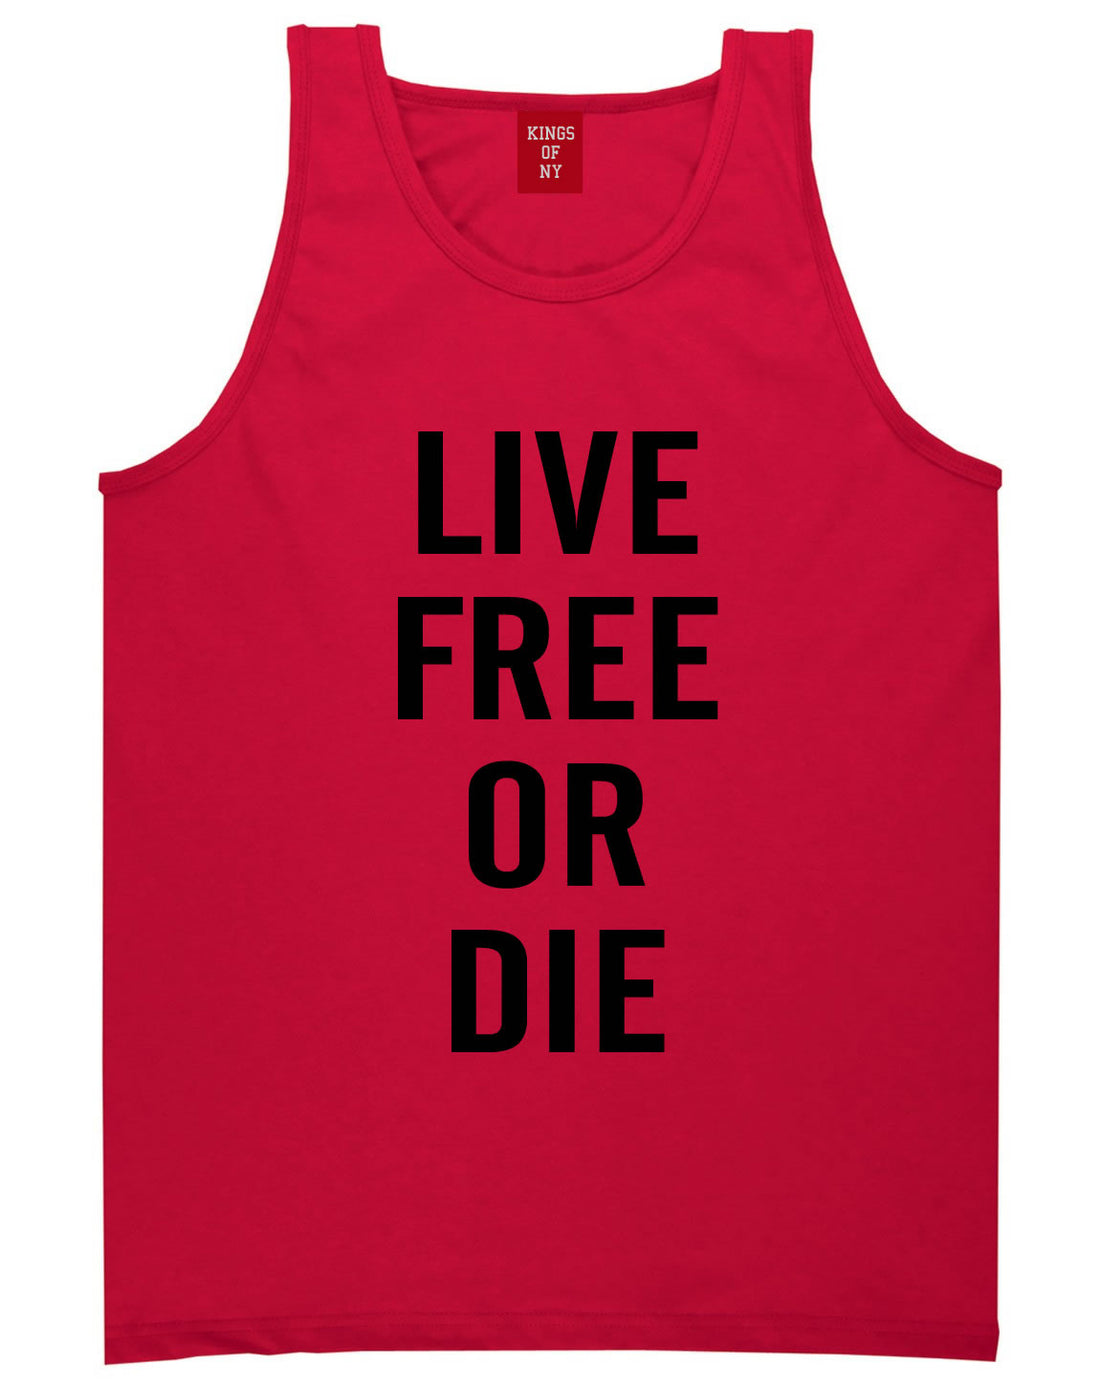 Live Free Or Die Tank Top in Red By Kings Of NY